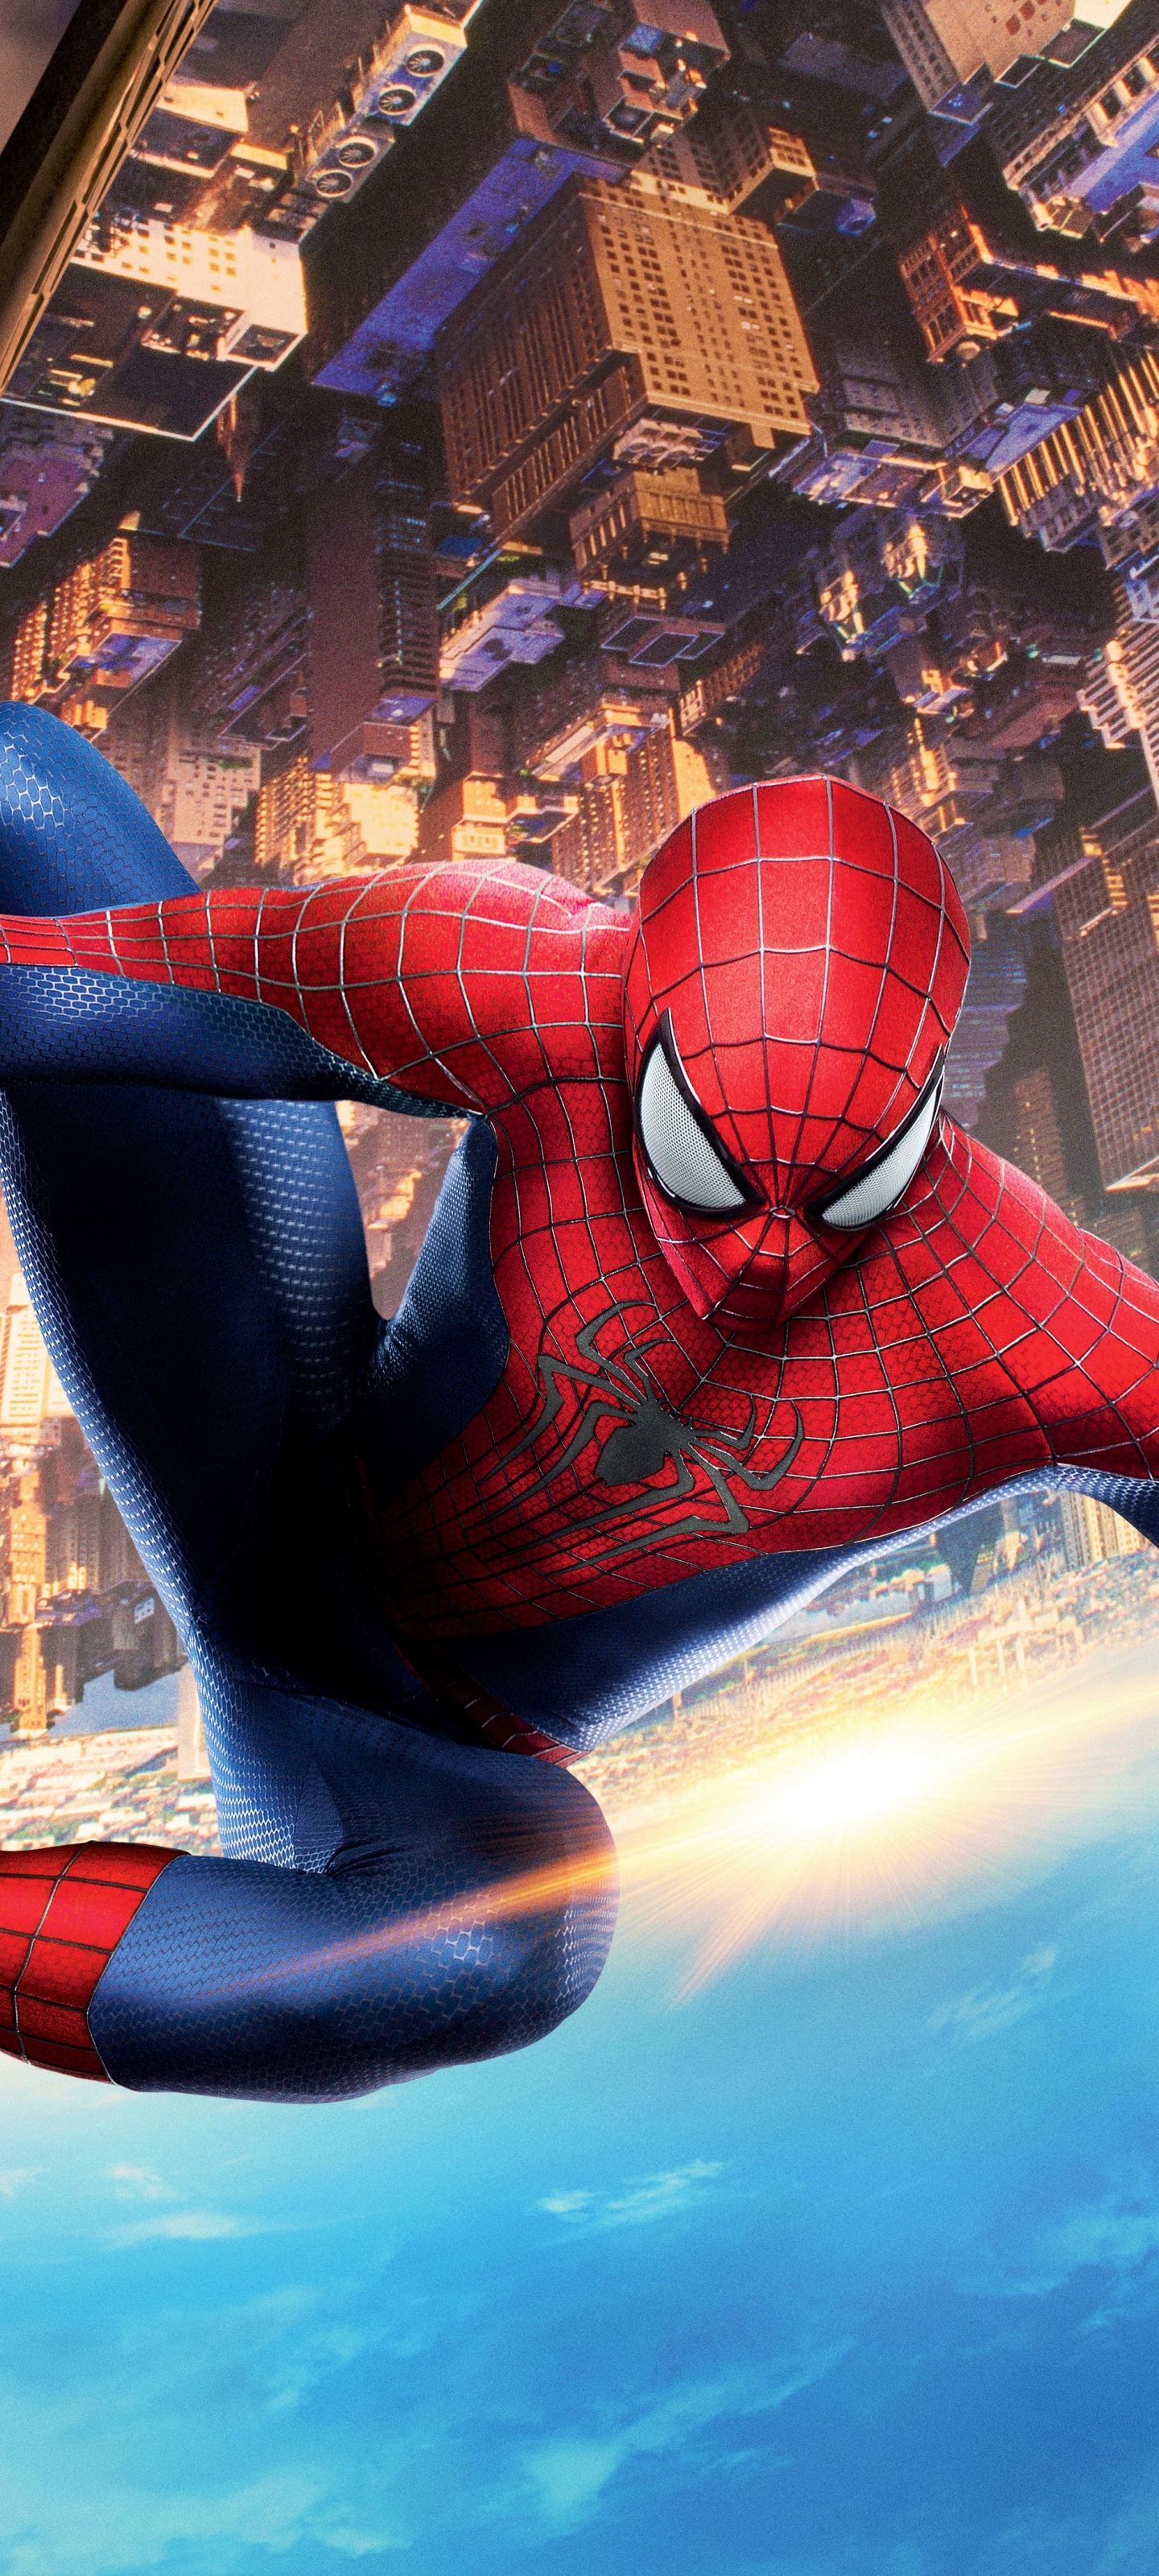 The Amazing SpiderMan 2 HD wallpapers free download  Wallpaperbetter